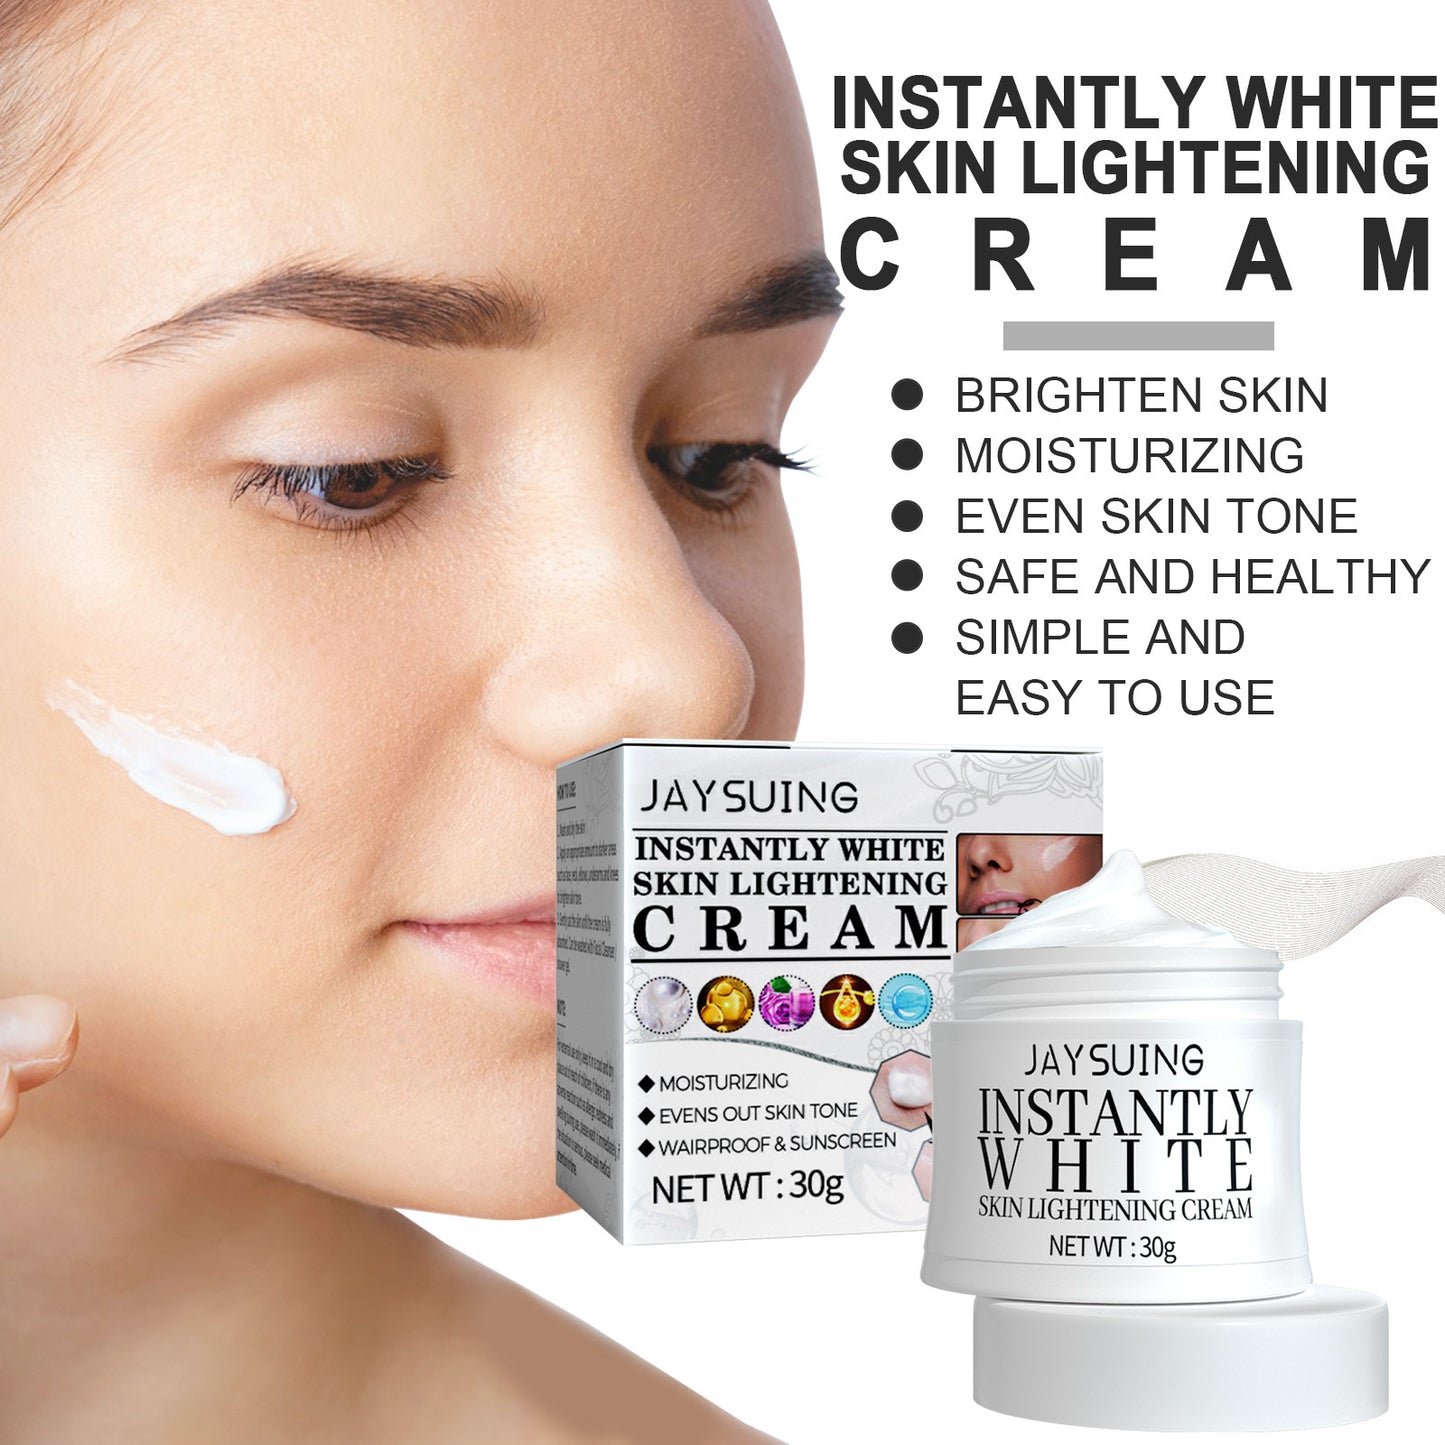 Jaysuing Lazy Face Cream Lightweight, Breathable, Beautiful And Tender Skin, Natural Concealer, Nude Makeup(30g)